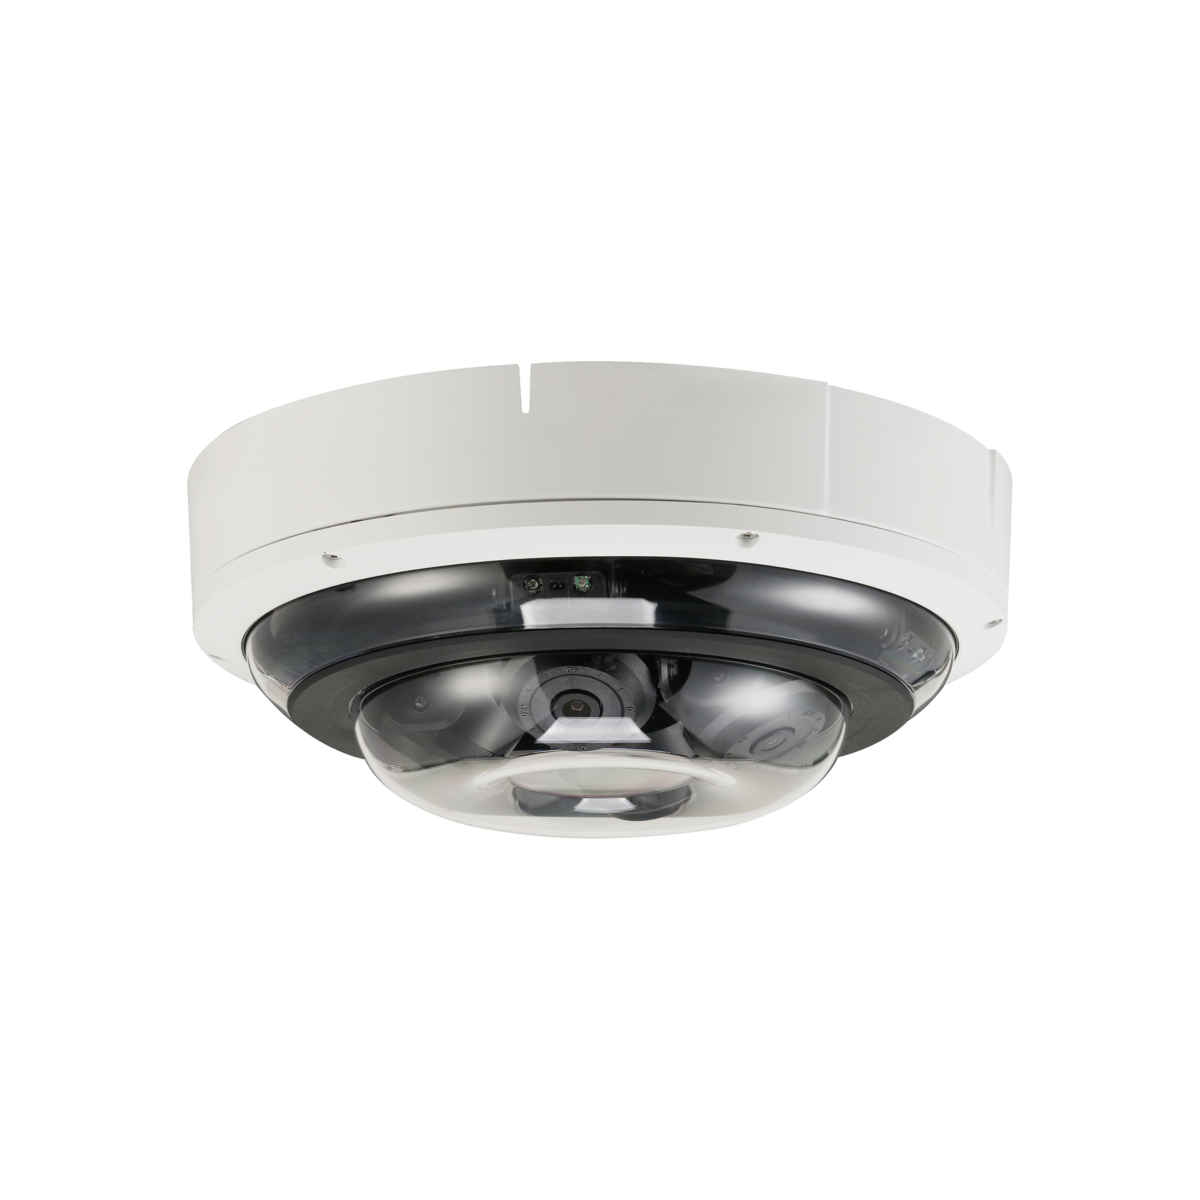 PANORAMIC SERIES IP CAMERA WHITE AI 360° PANORAMIC 2MP/1080P H.264/4+/5/5+ DOME 140 TRUE WDR METAL 2.7-12MM MOTORISED LENS 4X ZOOM STARLIGHT IR 30M POE+ IP67 WITHOUT MIC AUDIO IN AUDIO OUT 1 x ALARM IN 1 x ALARM OUT SUPPORT UP TO 256GB SD IK10 24VAC